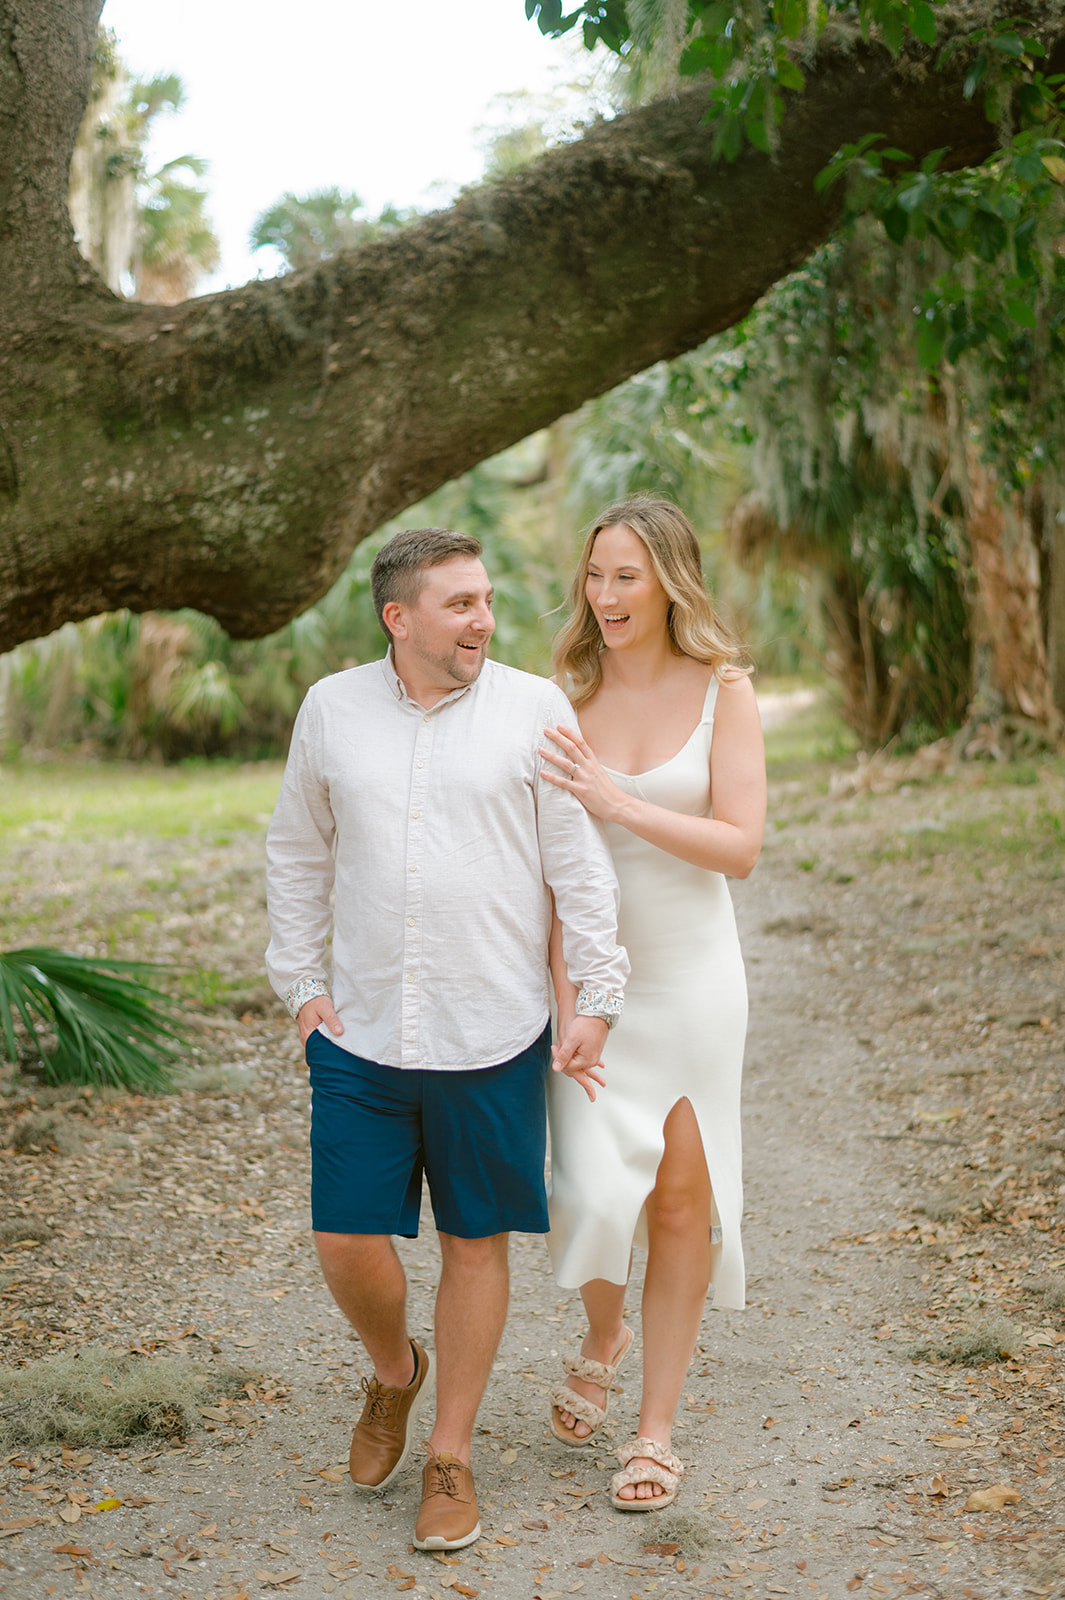 "Outdoor engagement photo with natural lighting at Philippe Park, Tampa Florida"


